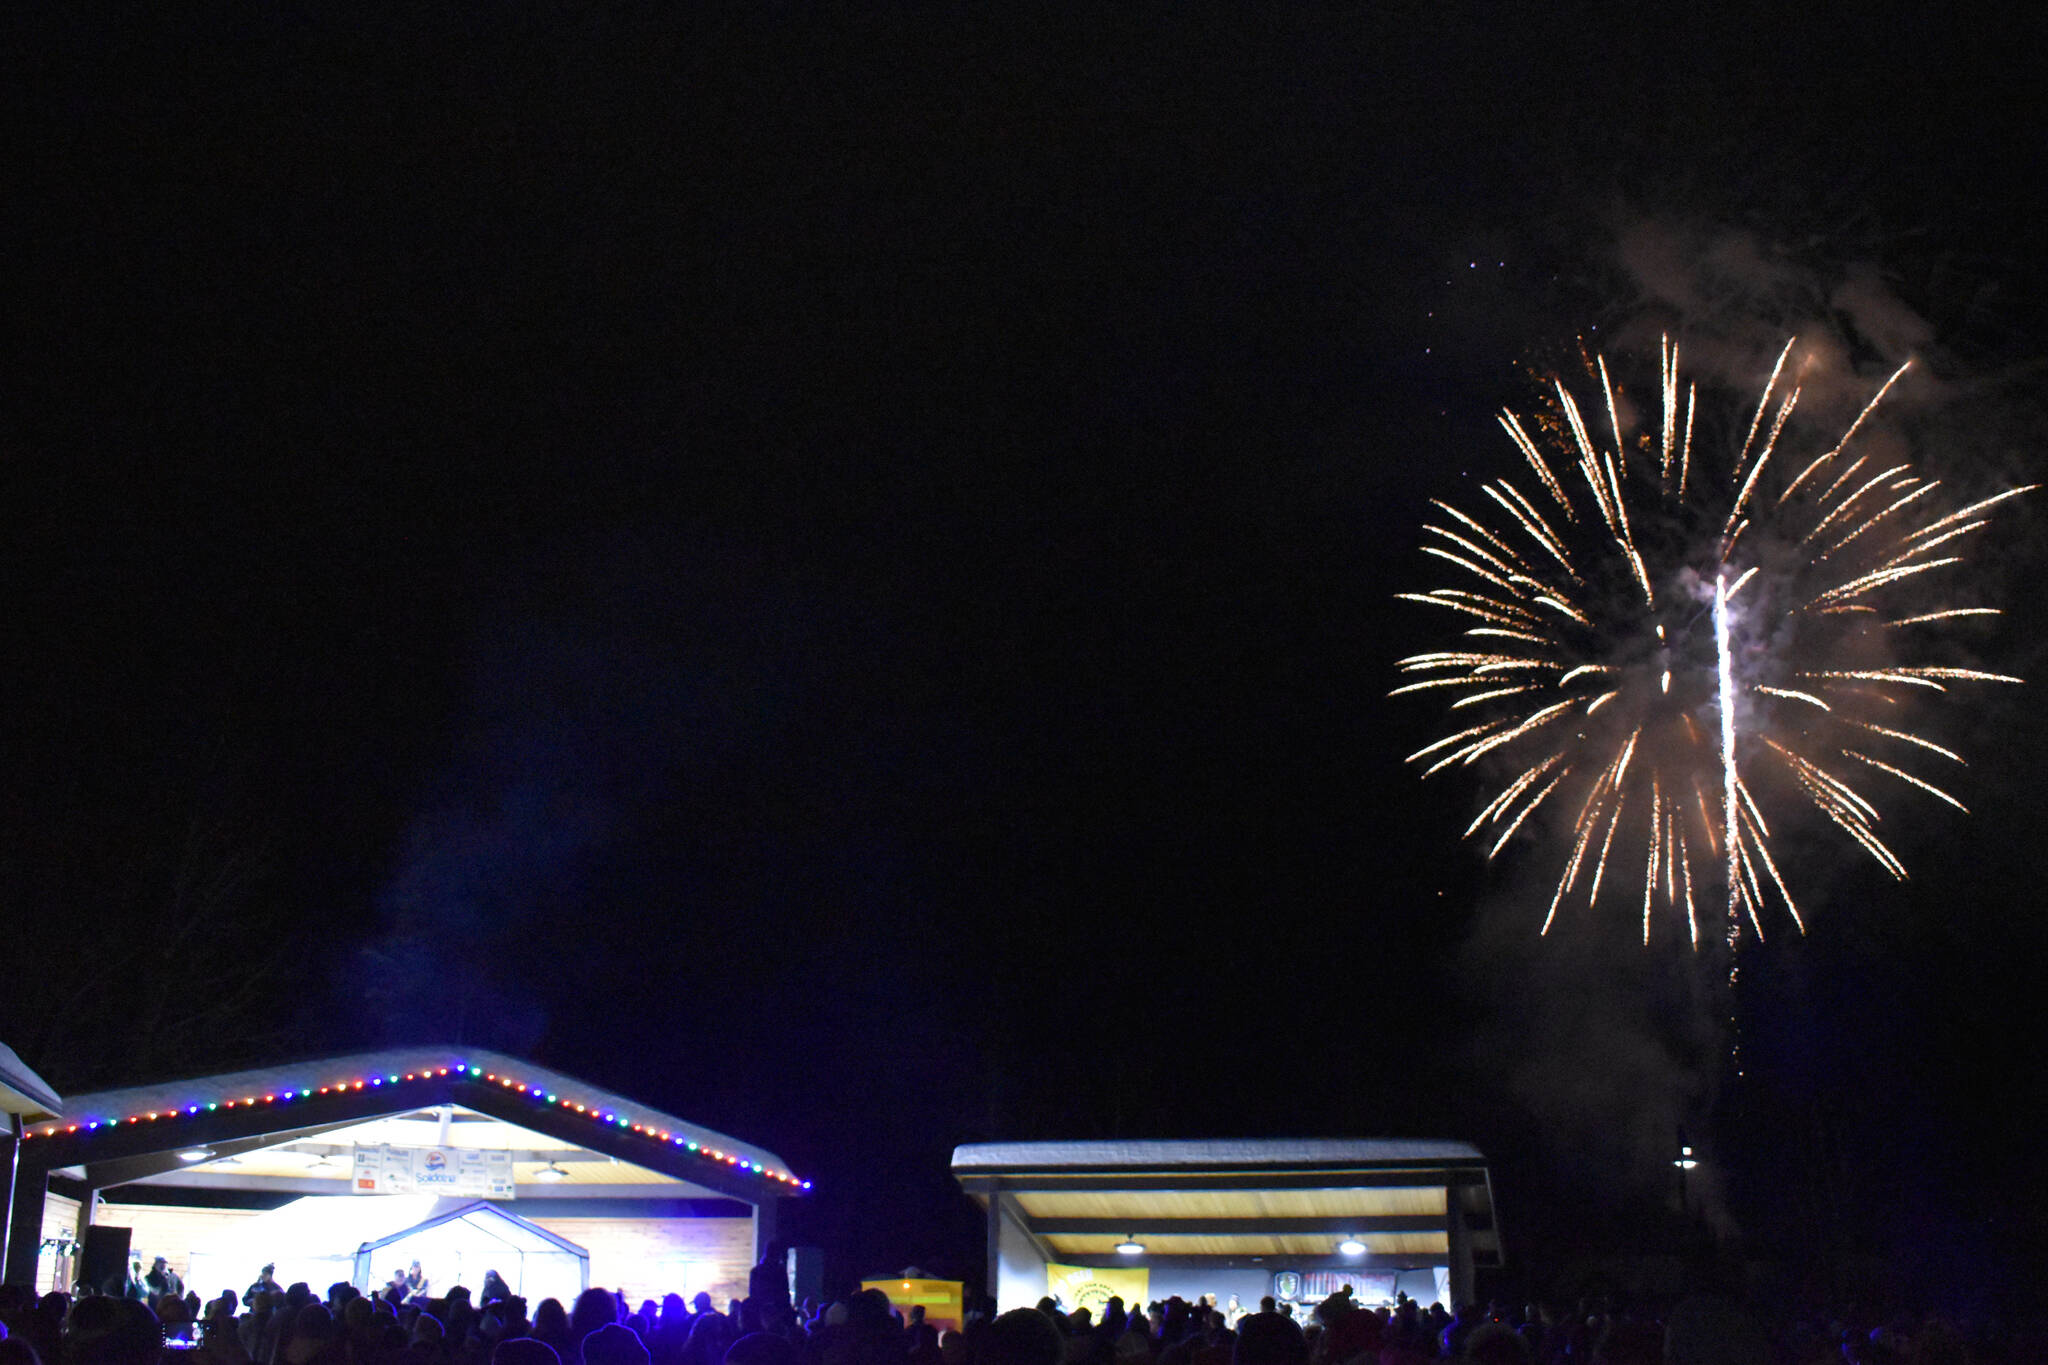 Fireworks explode over a audience of hundreds as the Derek Poppin Band performs onstage during Frozen RiverFest on Saturday, Feb. 18, 2023 at Soldotna Creek Park in Soldotna, Alaska. (Jake Dye/Peninsula Clarion)
Fireworks explode over a audience of hundreds as the Derek Poppin Band performs onstage during Frozen RiverFest on Saturday, Feb. 18, 2023 at Soldotna Creek Park in Soldotna, Alaska. (Jake Dye/Peninsula Clarion)